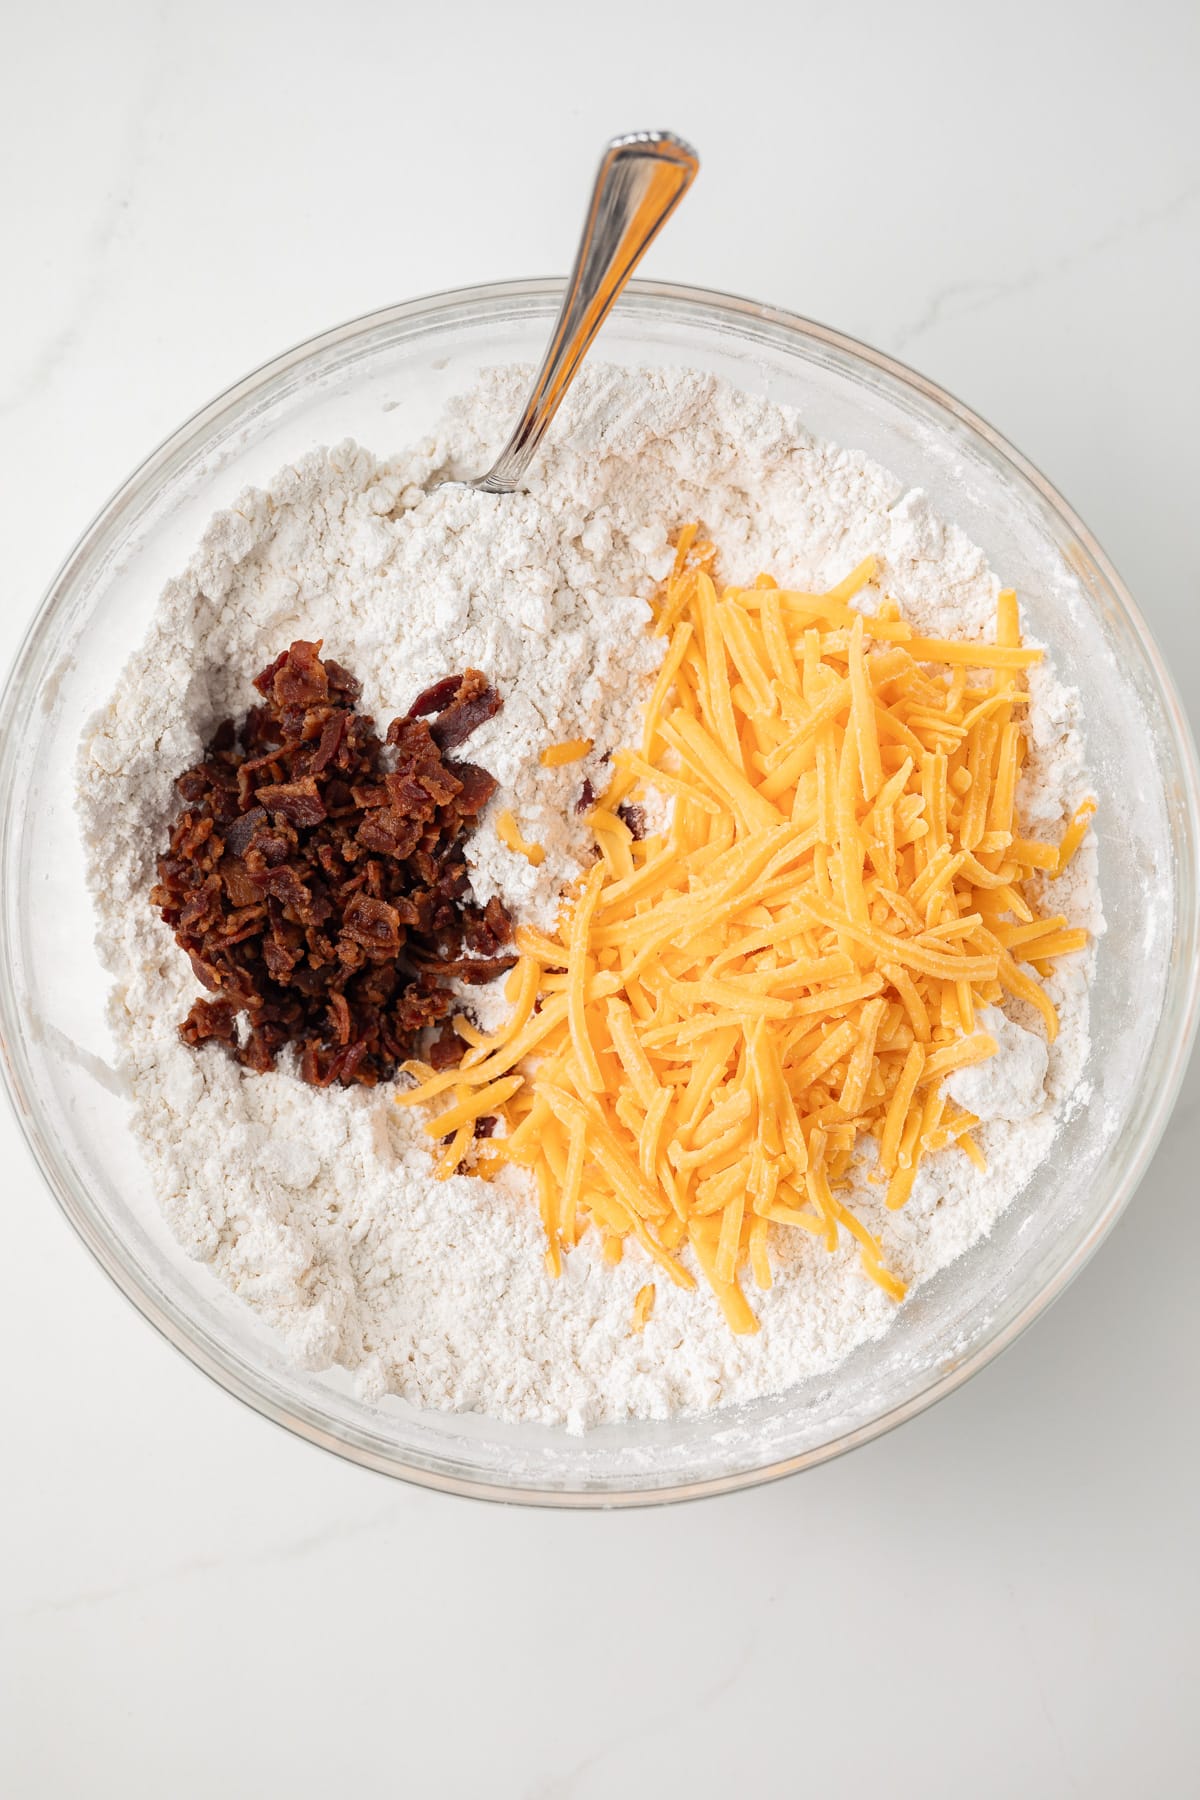 Flour with bacon crumbles and shredded cheddar in a glass bowl.